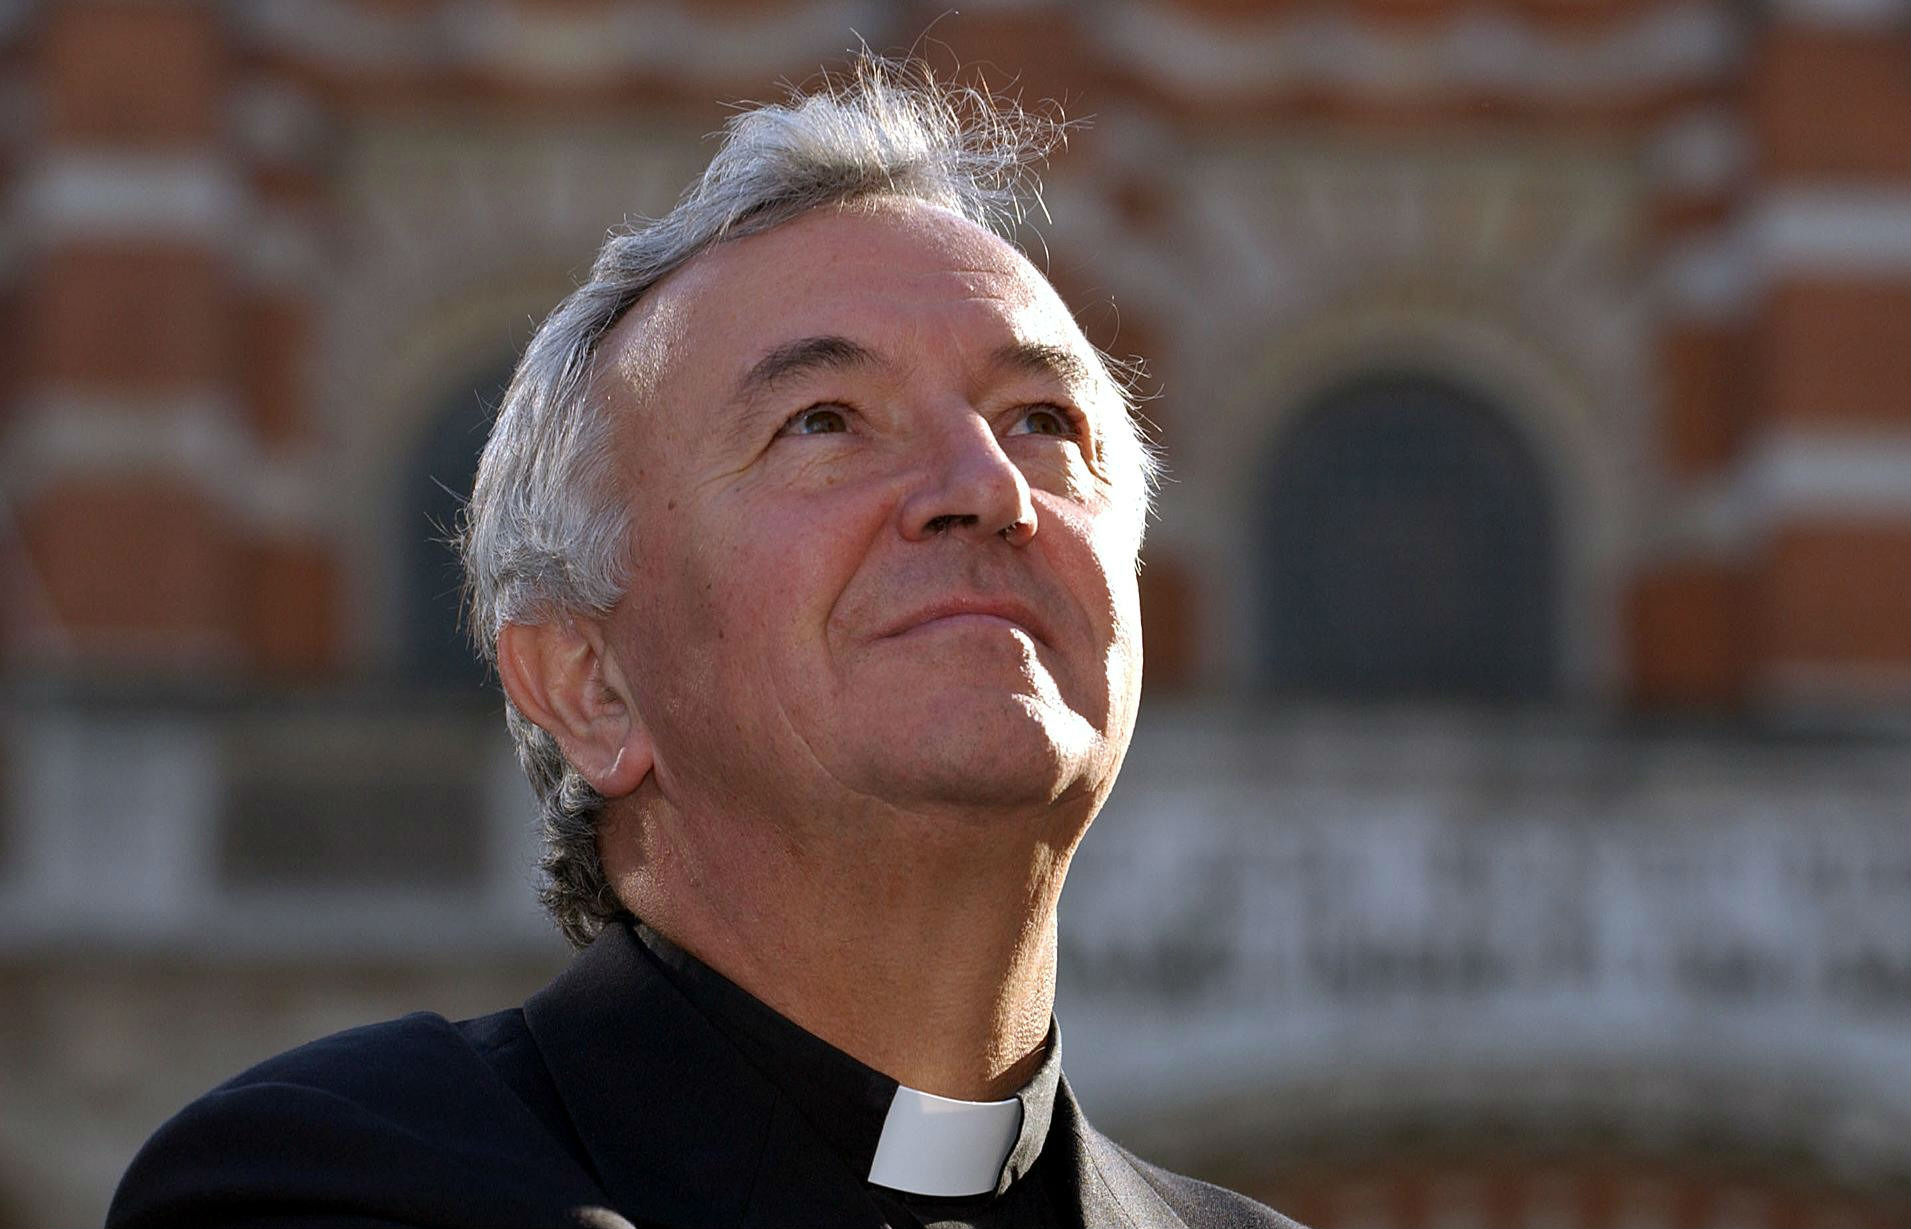 Faith in Christ leads us 'beyond the narrow confines of our self-assertion', says Cardinal Nichols